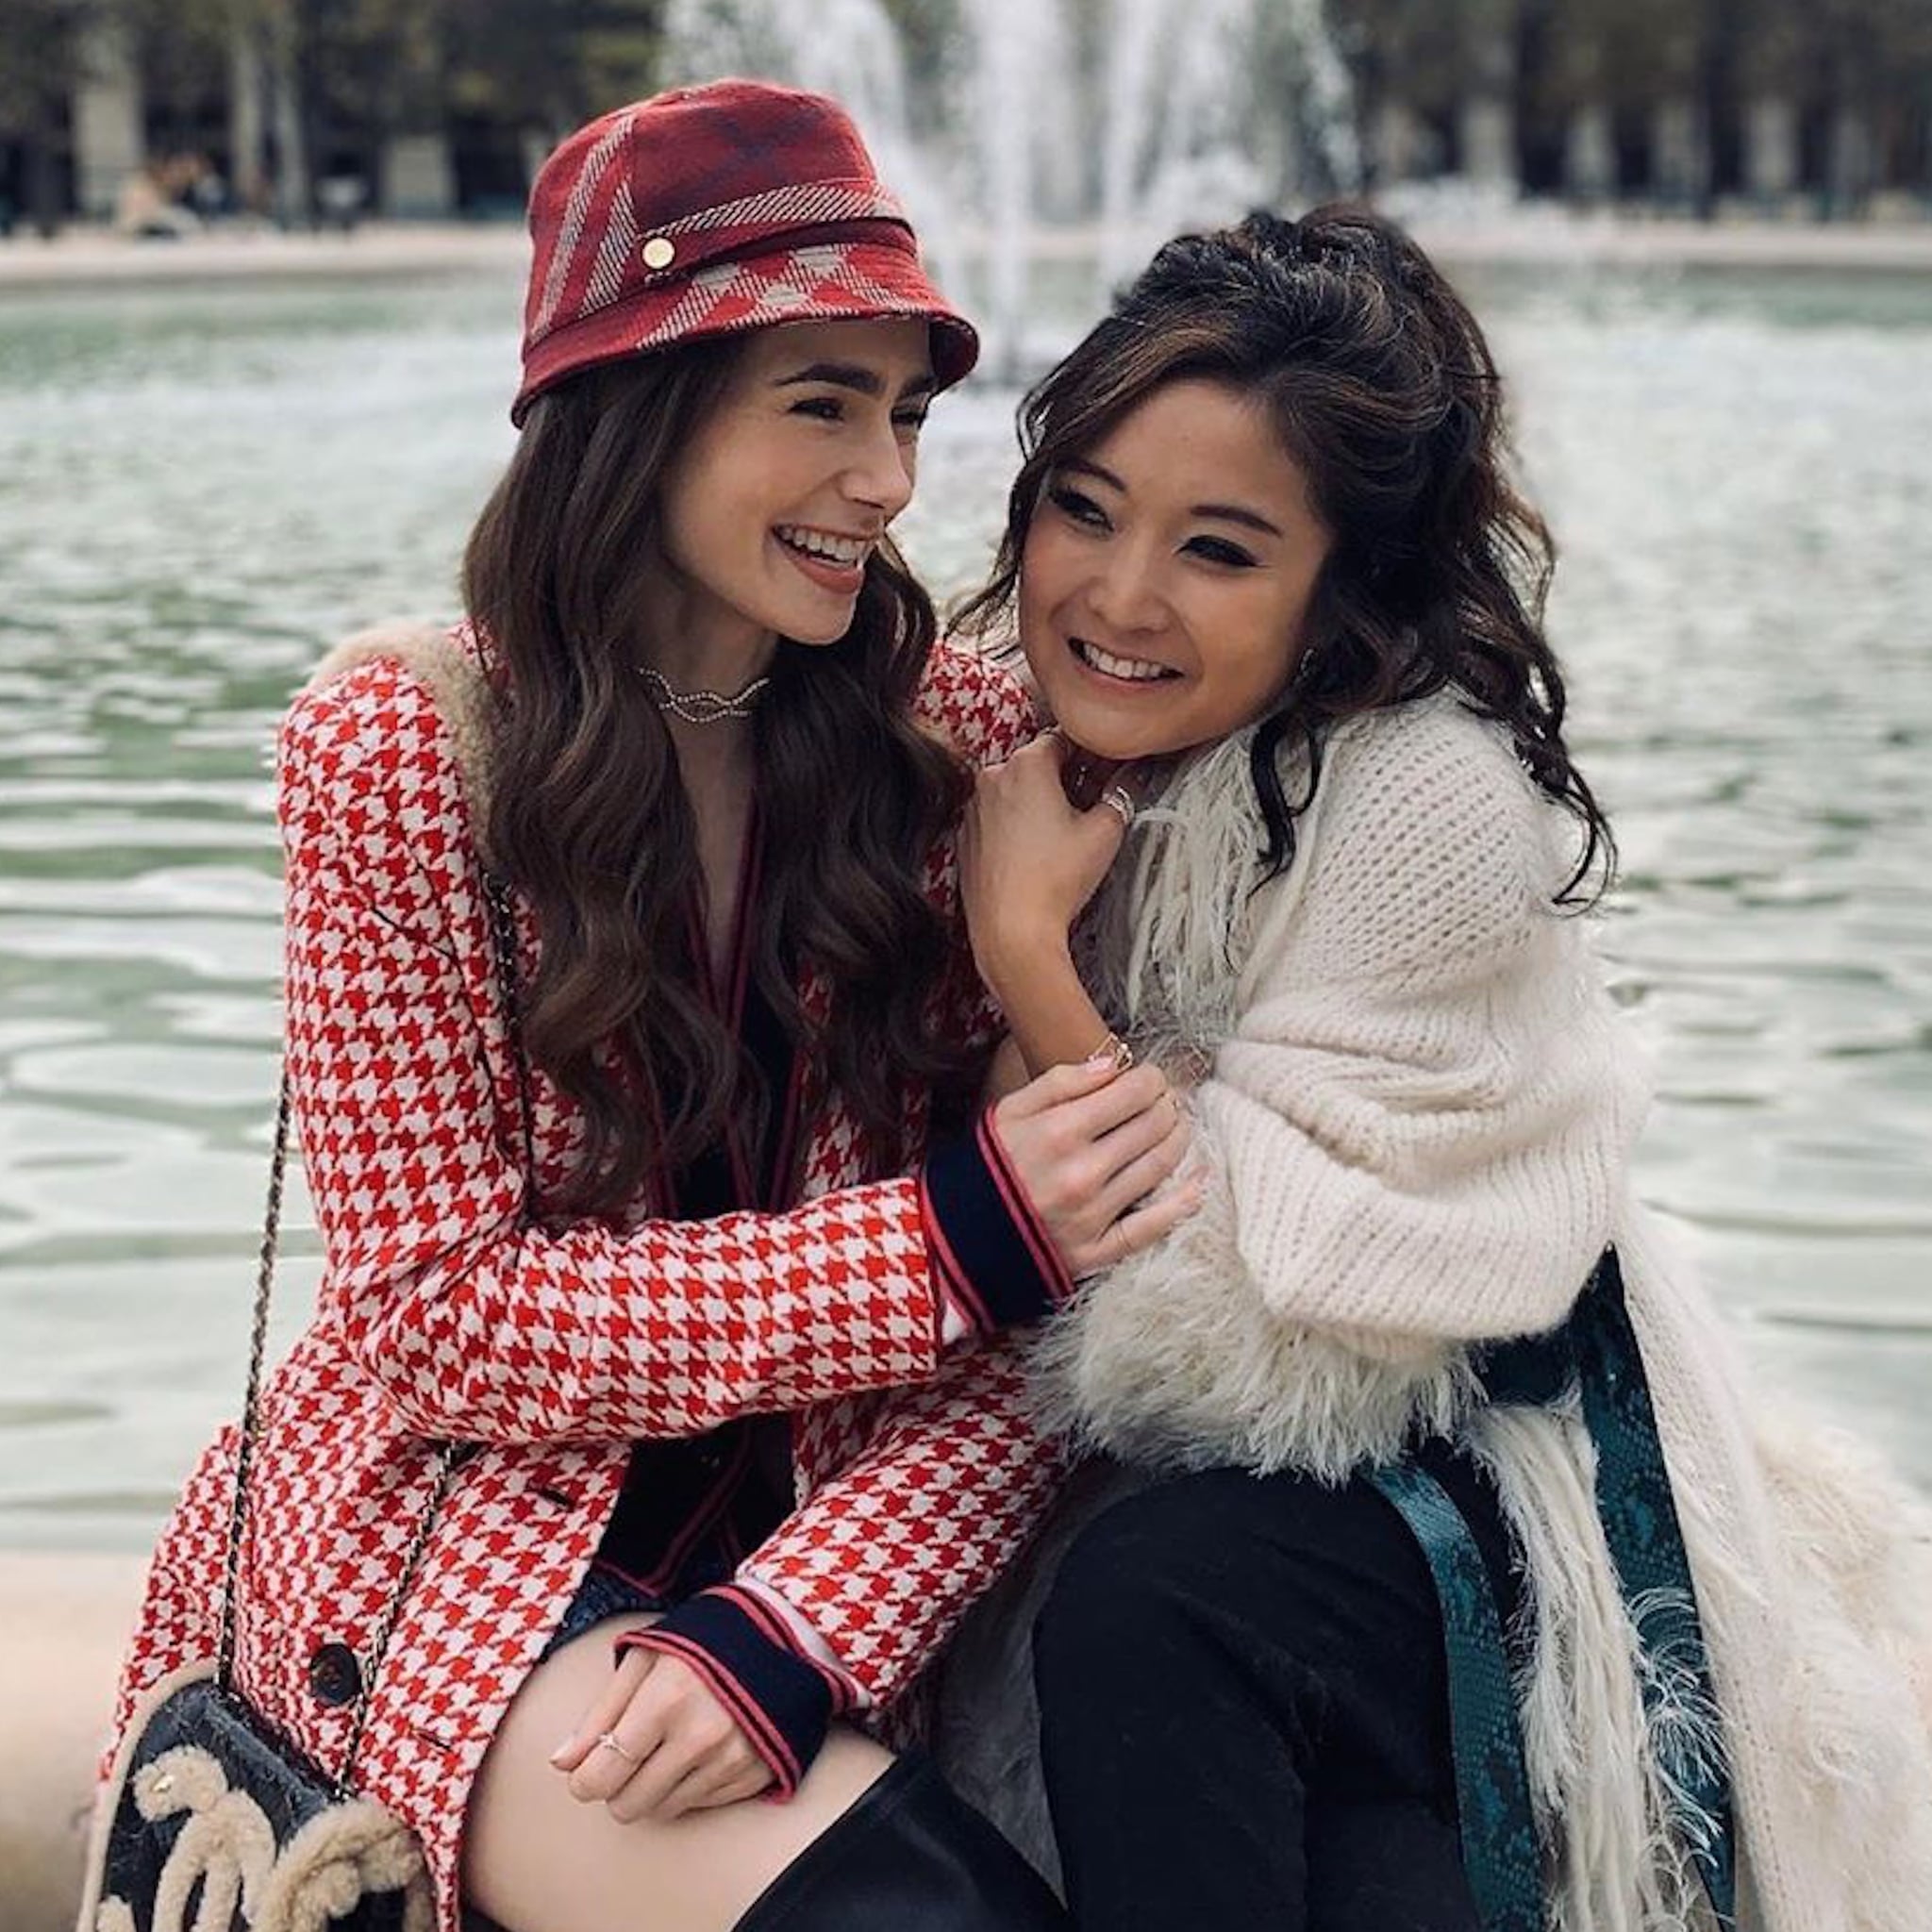 Emily in Paris' Stars Lily Collins & Ashley Park Delivered Amazing